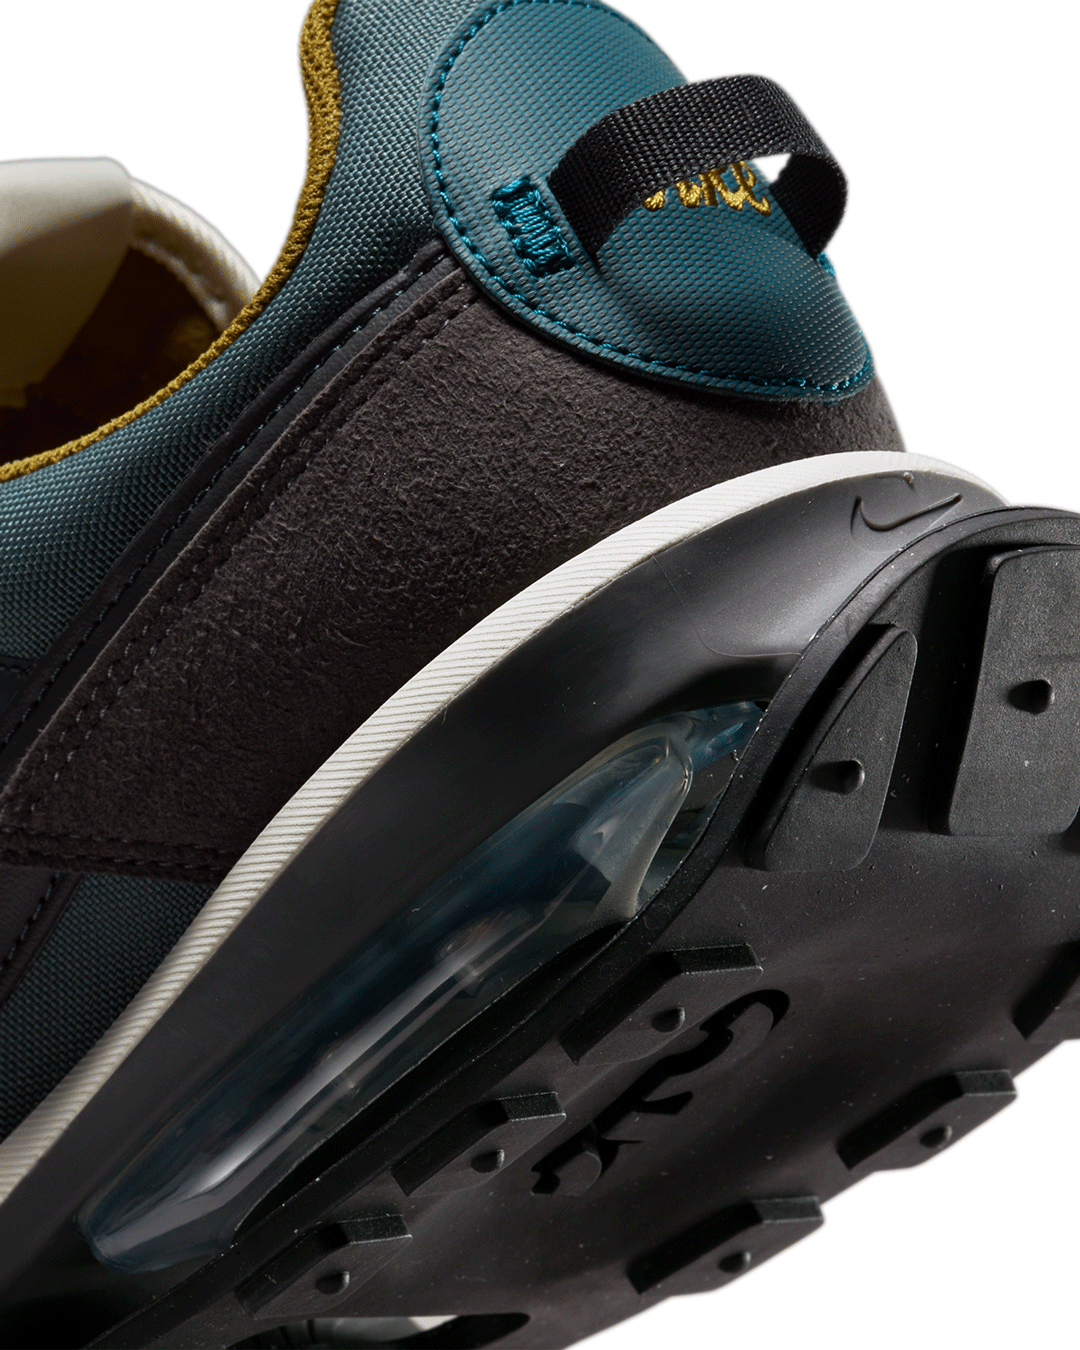 Air Max Pre-Day LX Hasta/Anthracite/Iron Grey